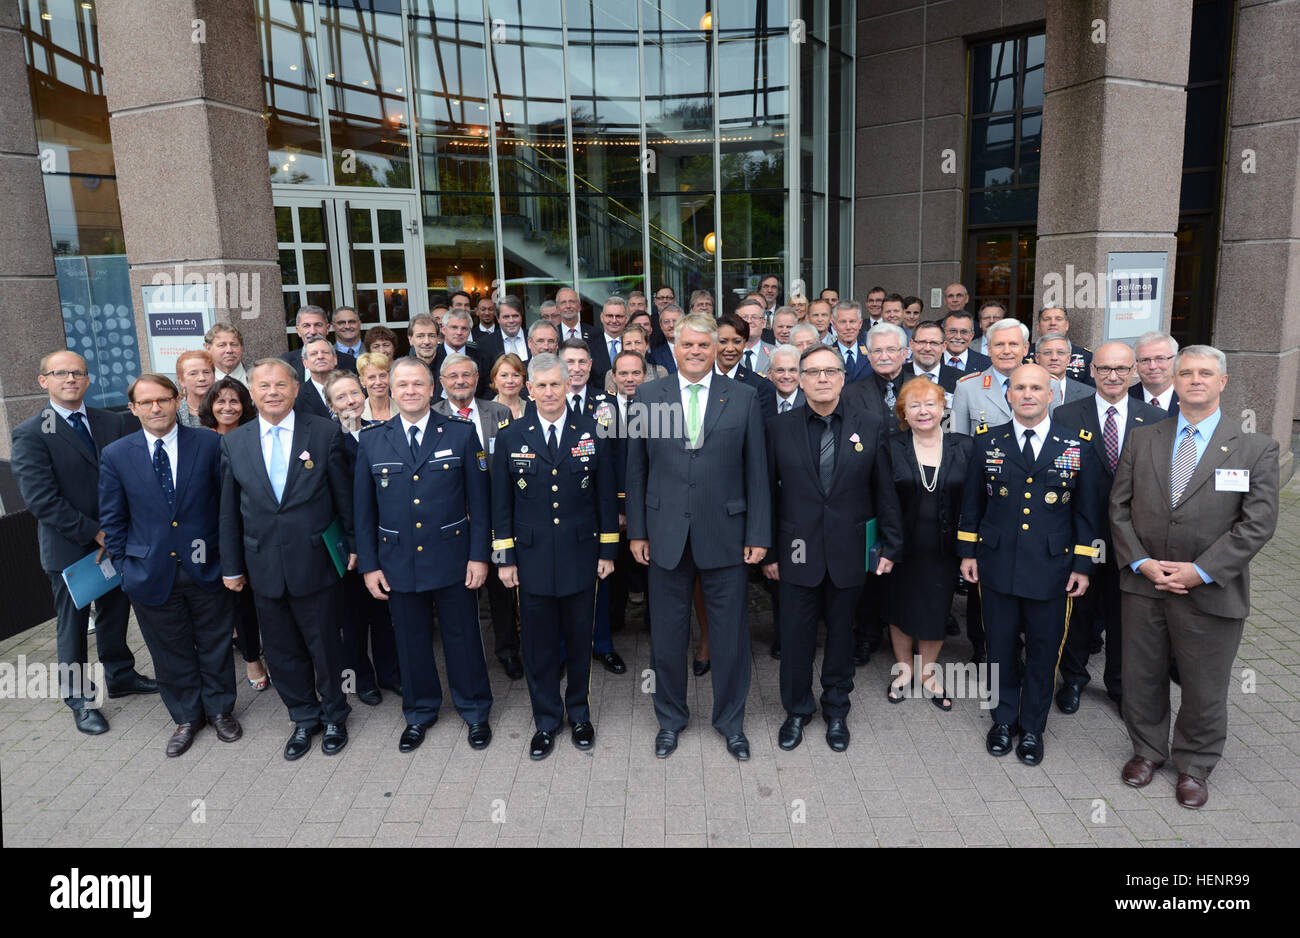 U.S. and German partners pose for a group photograph during the United States and Germany consultation meeting in Vaihingen, Germany, Sept. 3, 2014. (U.S. Army photo by Adam Sanders/Released) U.S. and German partners pose for a group photograph during the United States and Germany consultation meeting in Vaihingen, Germany, Sept. 3, 2014 140904-A-RU412-028 Stock Photo